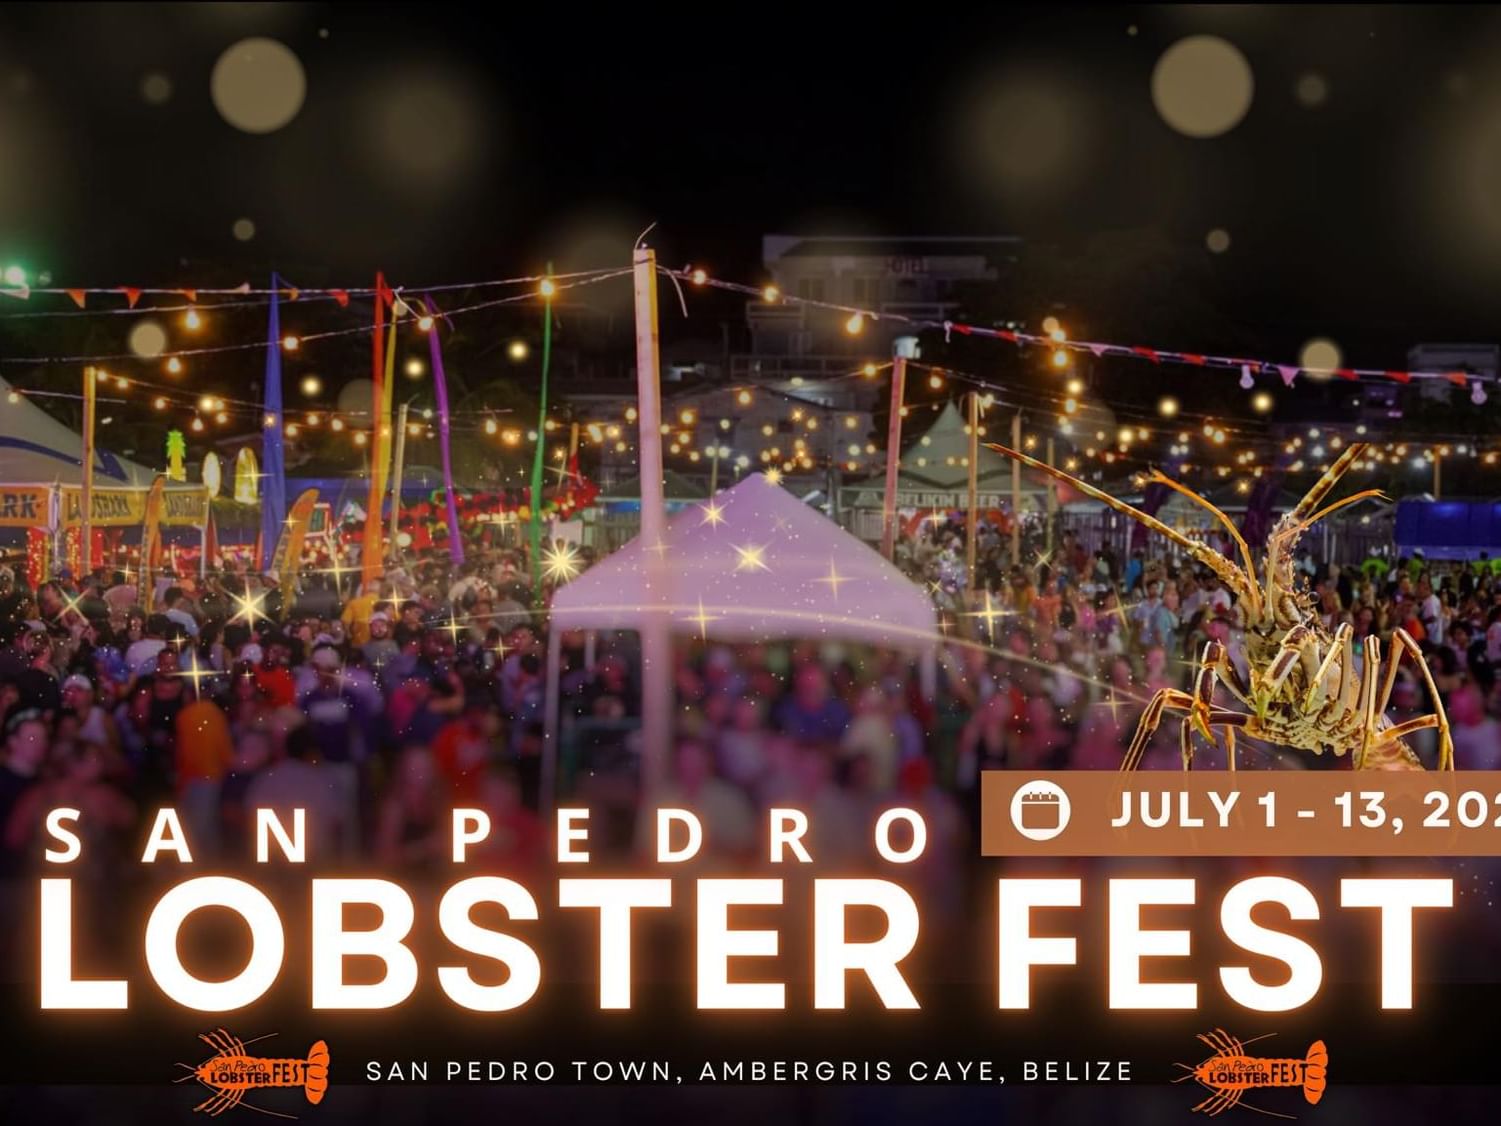 Belize's annual San Pedro Lobster Fest poster used at Alaia Belize Autograph Collection